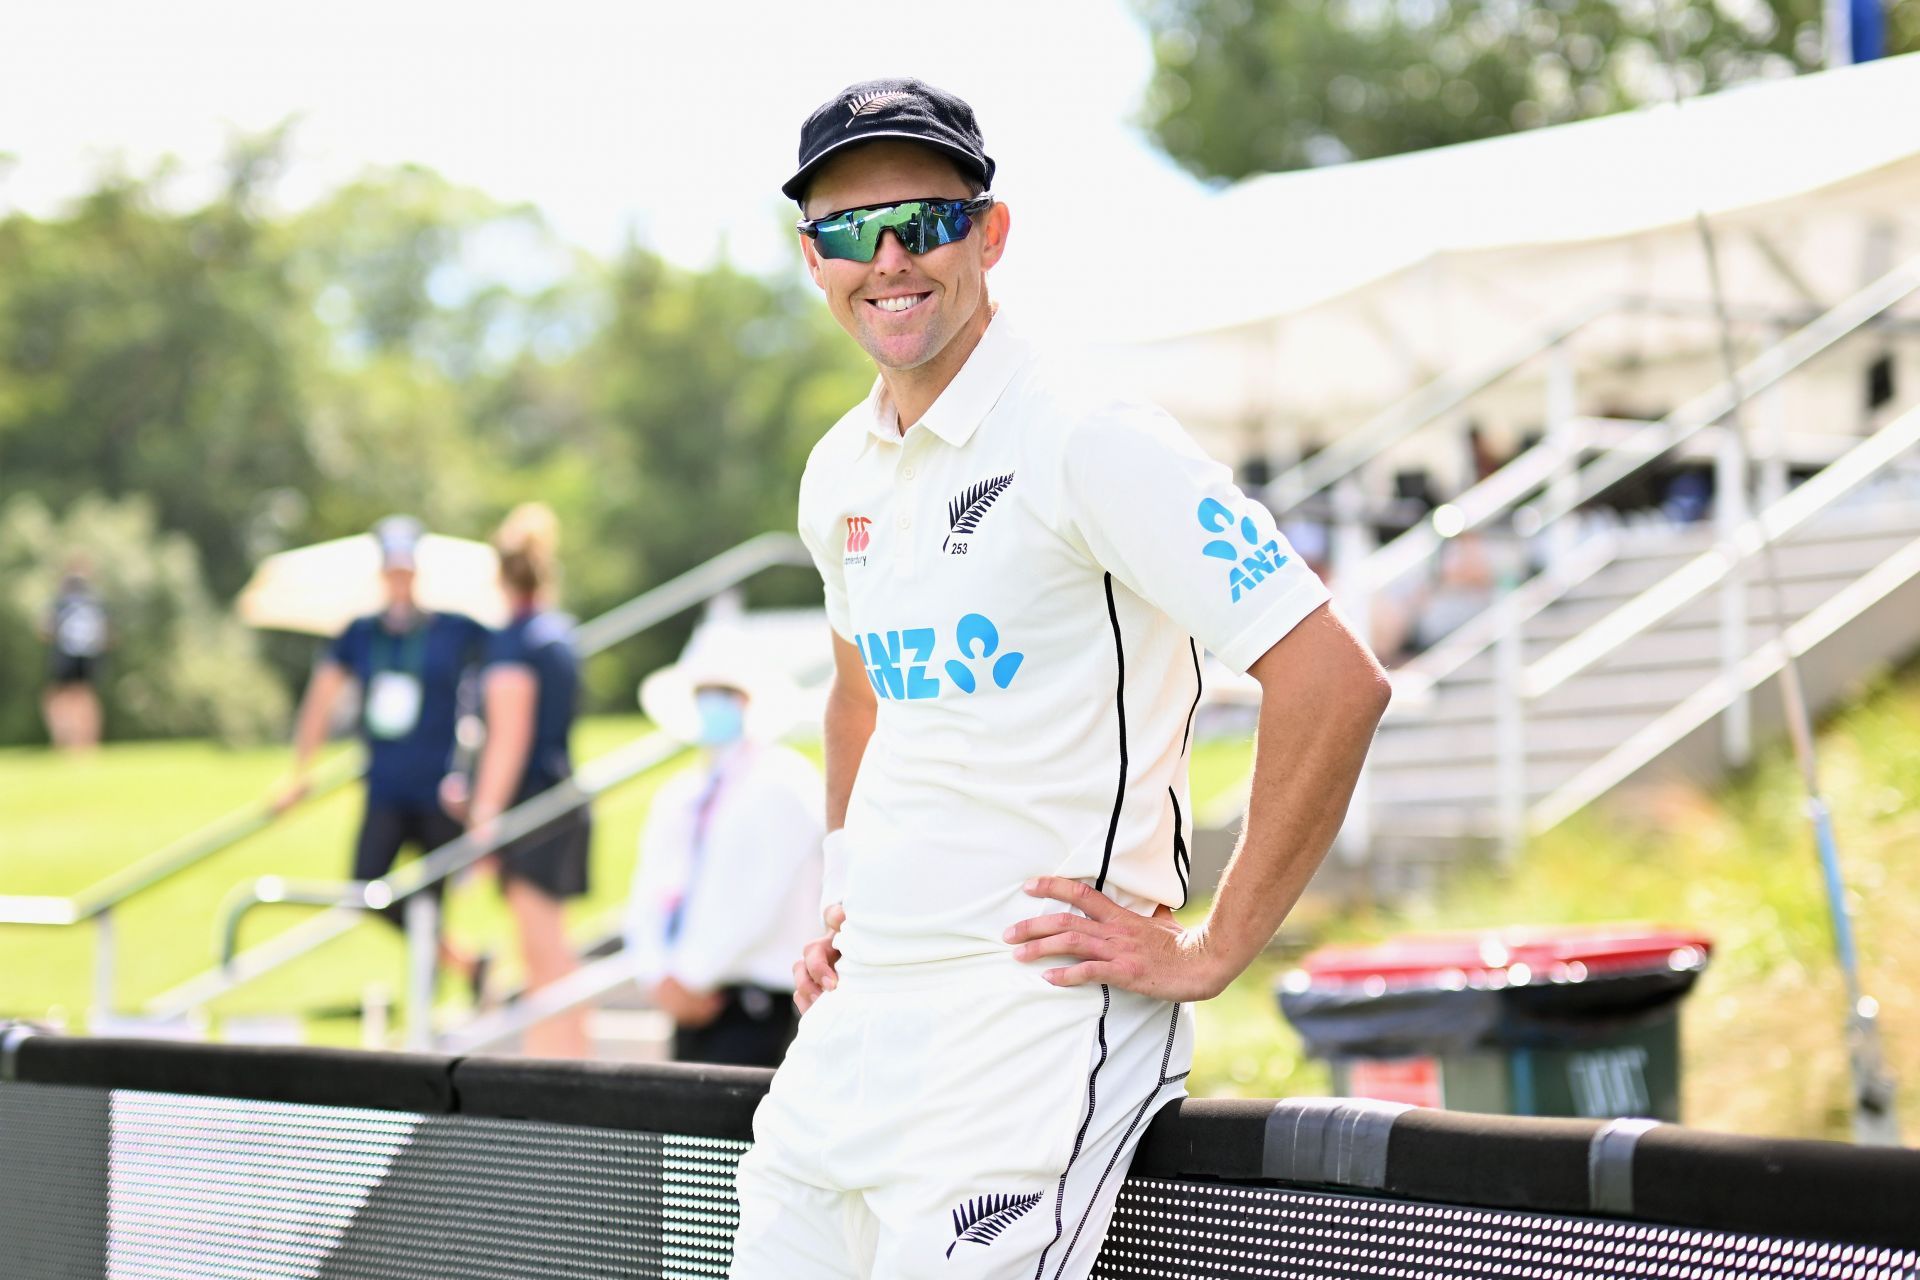 Trent Boult has 640 runs from 79 innings at No.11 in Tests (Pic: Getty)